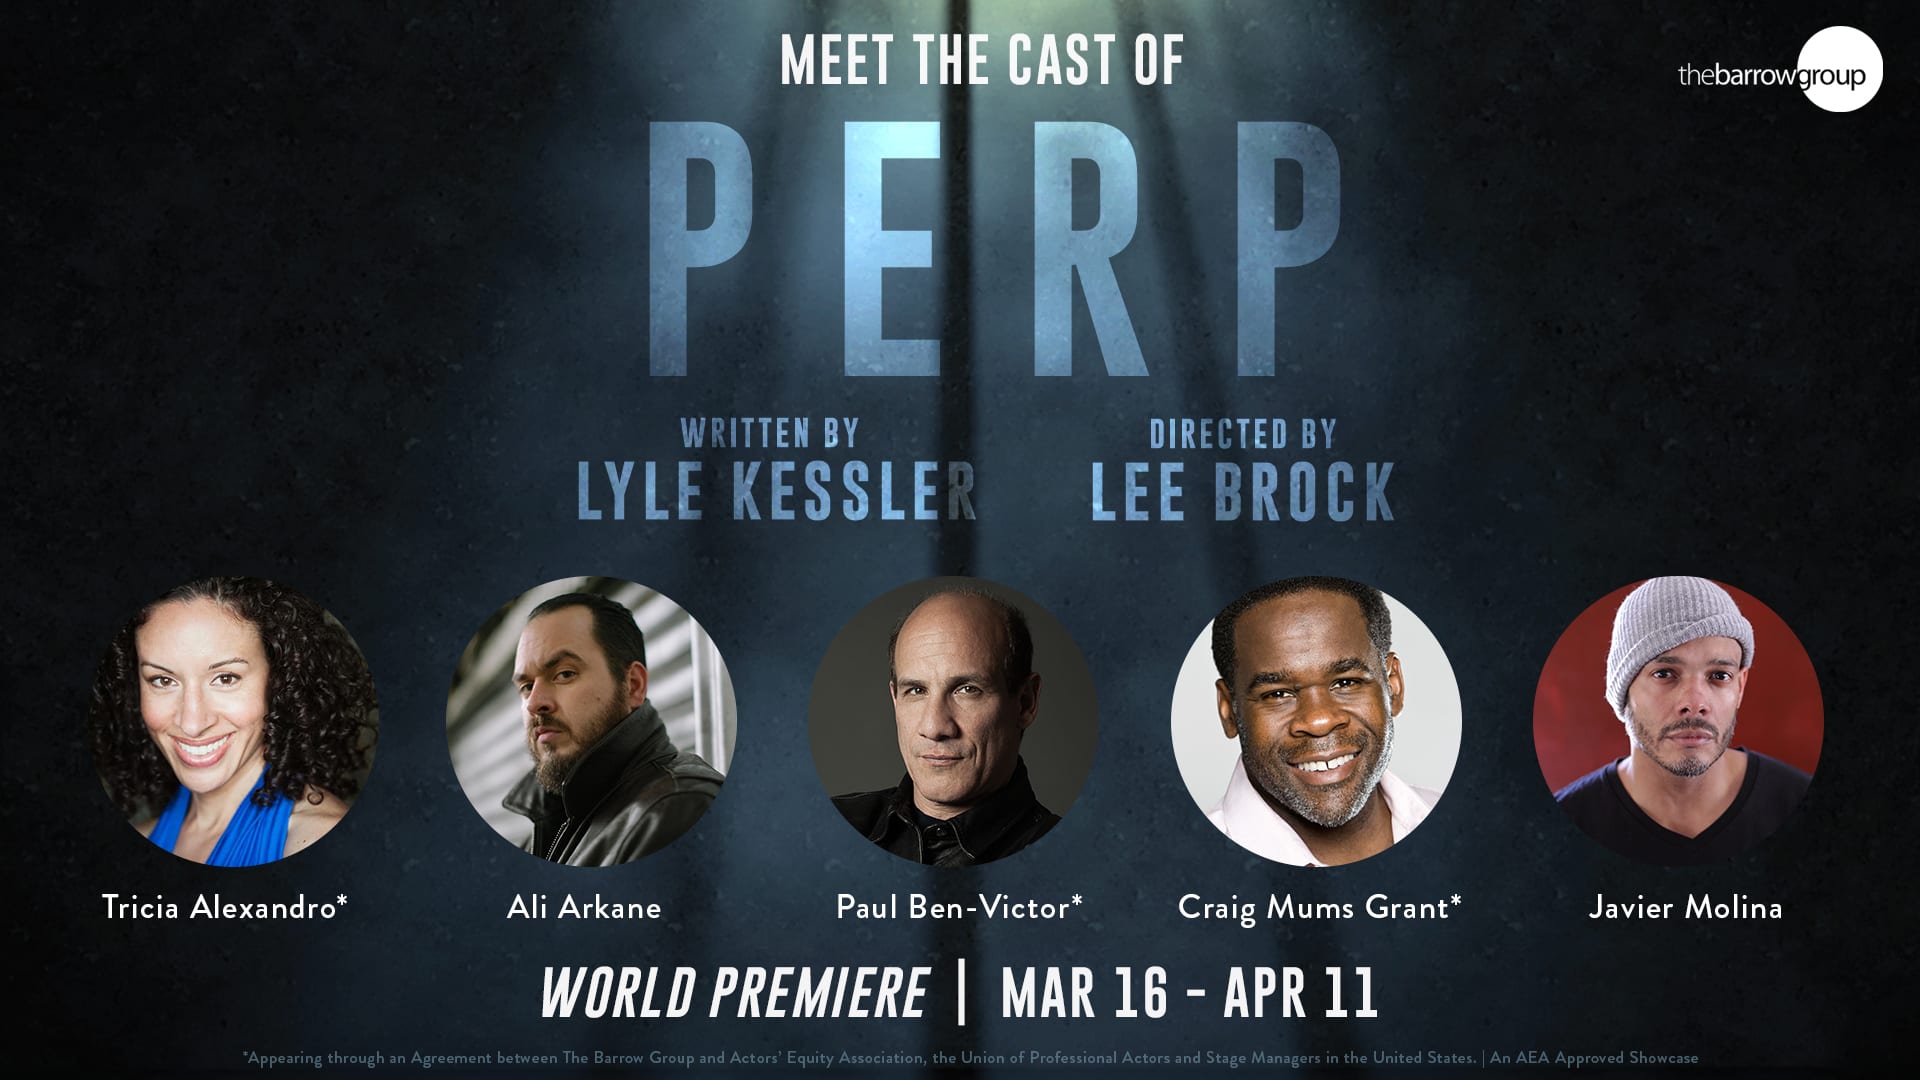 Cast of Perp play, banner